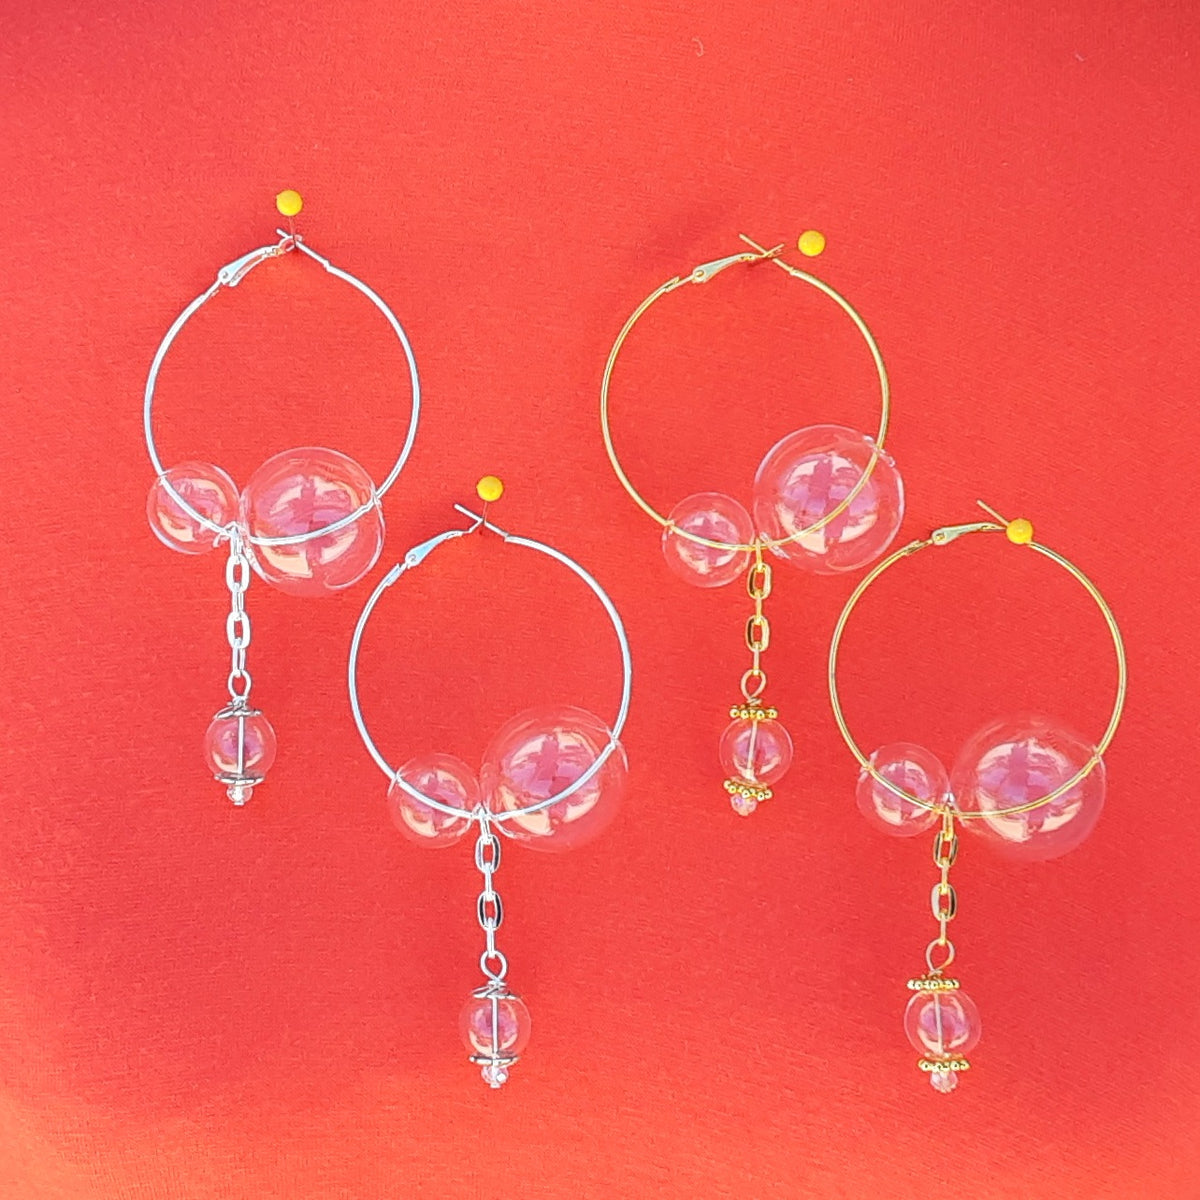 Hand Blown Glass Bubble Hoops in Gold or Silver Plated Statement Earrings - Bridesmaid Gift